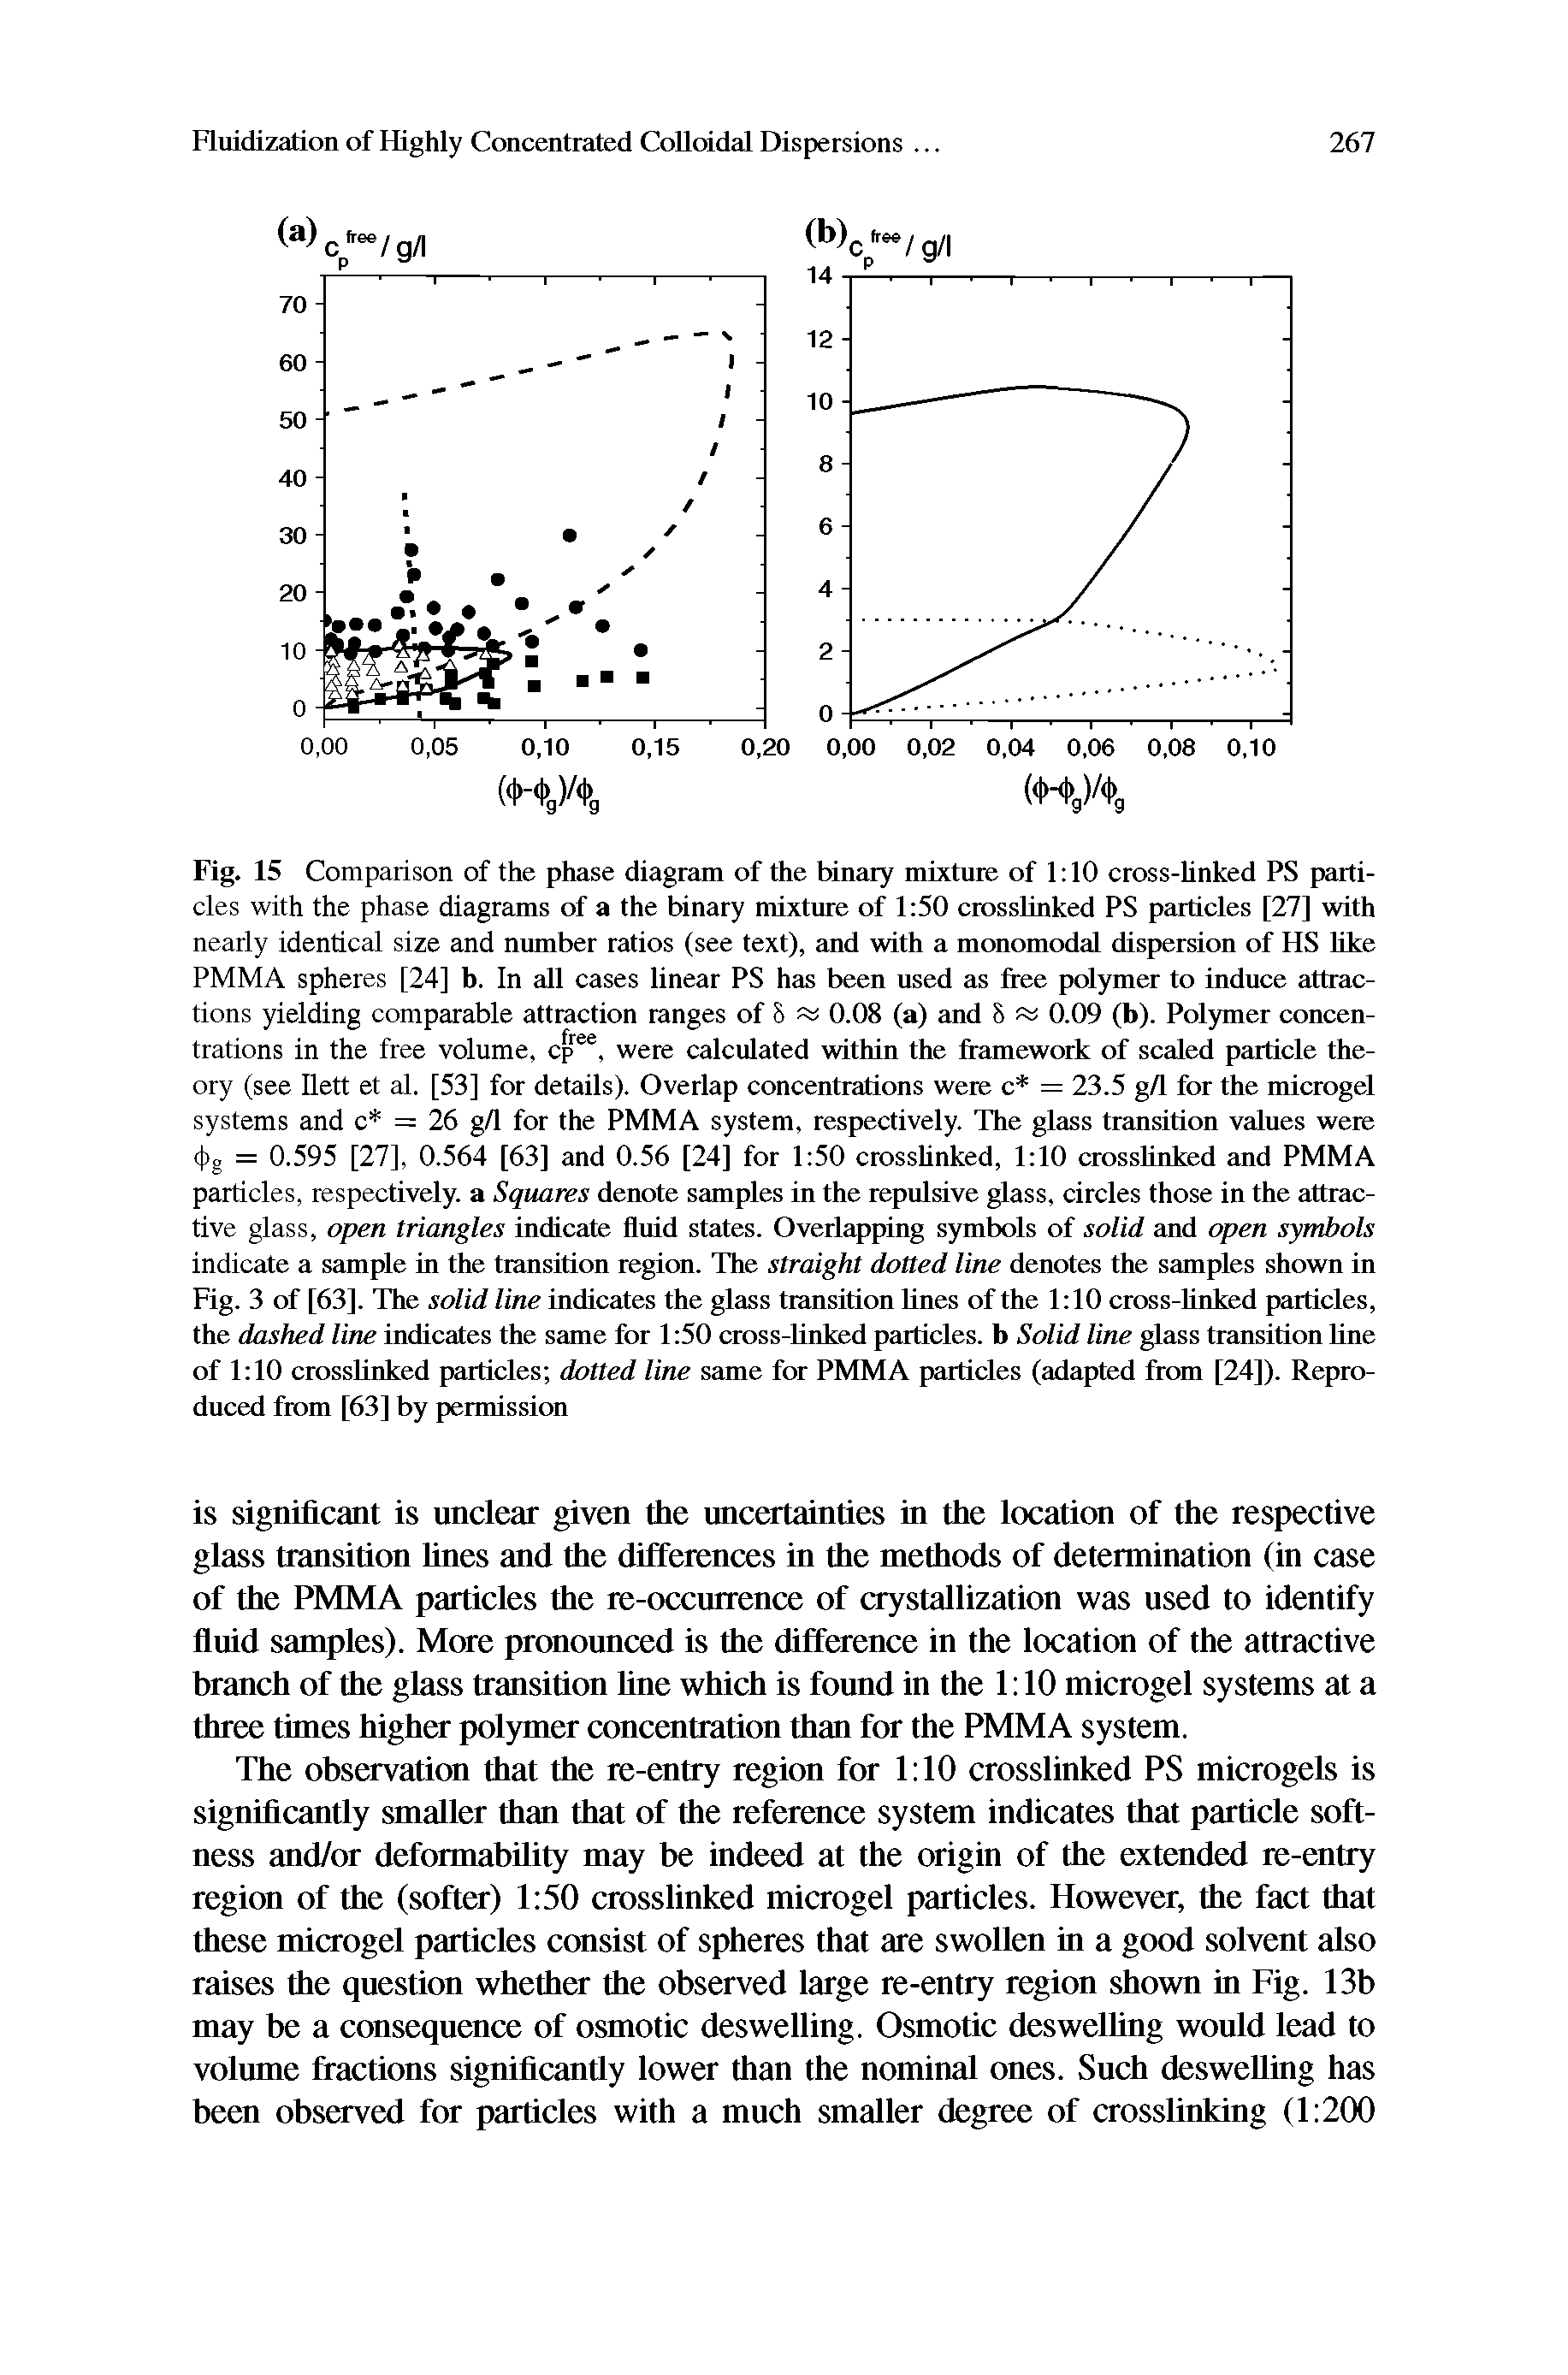 Fig. 15 Comparison of the phase diagram of the binary mixture of 1 10 cross-hnked PS particles with the phase diagrams of a the binary mixture of 1 50 ciosslinked PS particles [27] with nearly identical size and number ratios (see text), and with a monomodal dispersion of HS like PMMA spheres [24] b. In all cases linear PS has been used as free polymer to induce attractions yielding comparable attraction ranges of S 0.08 (a) and 8 0.09 (b). Polymer concen-...